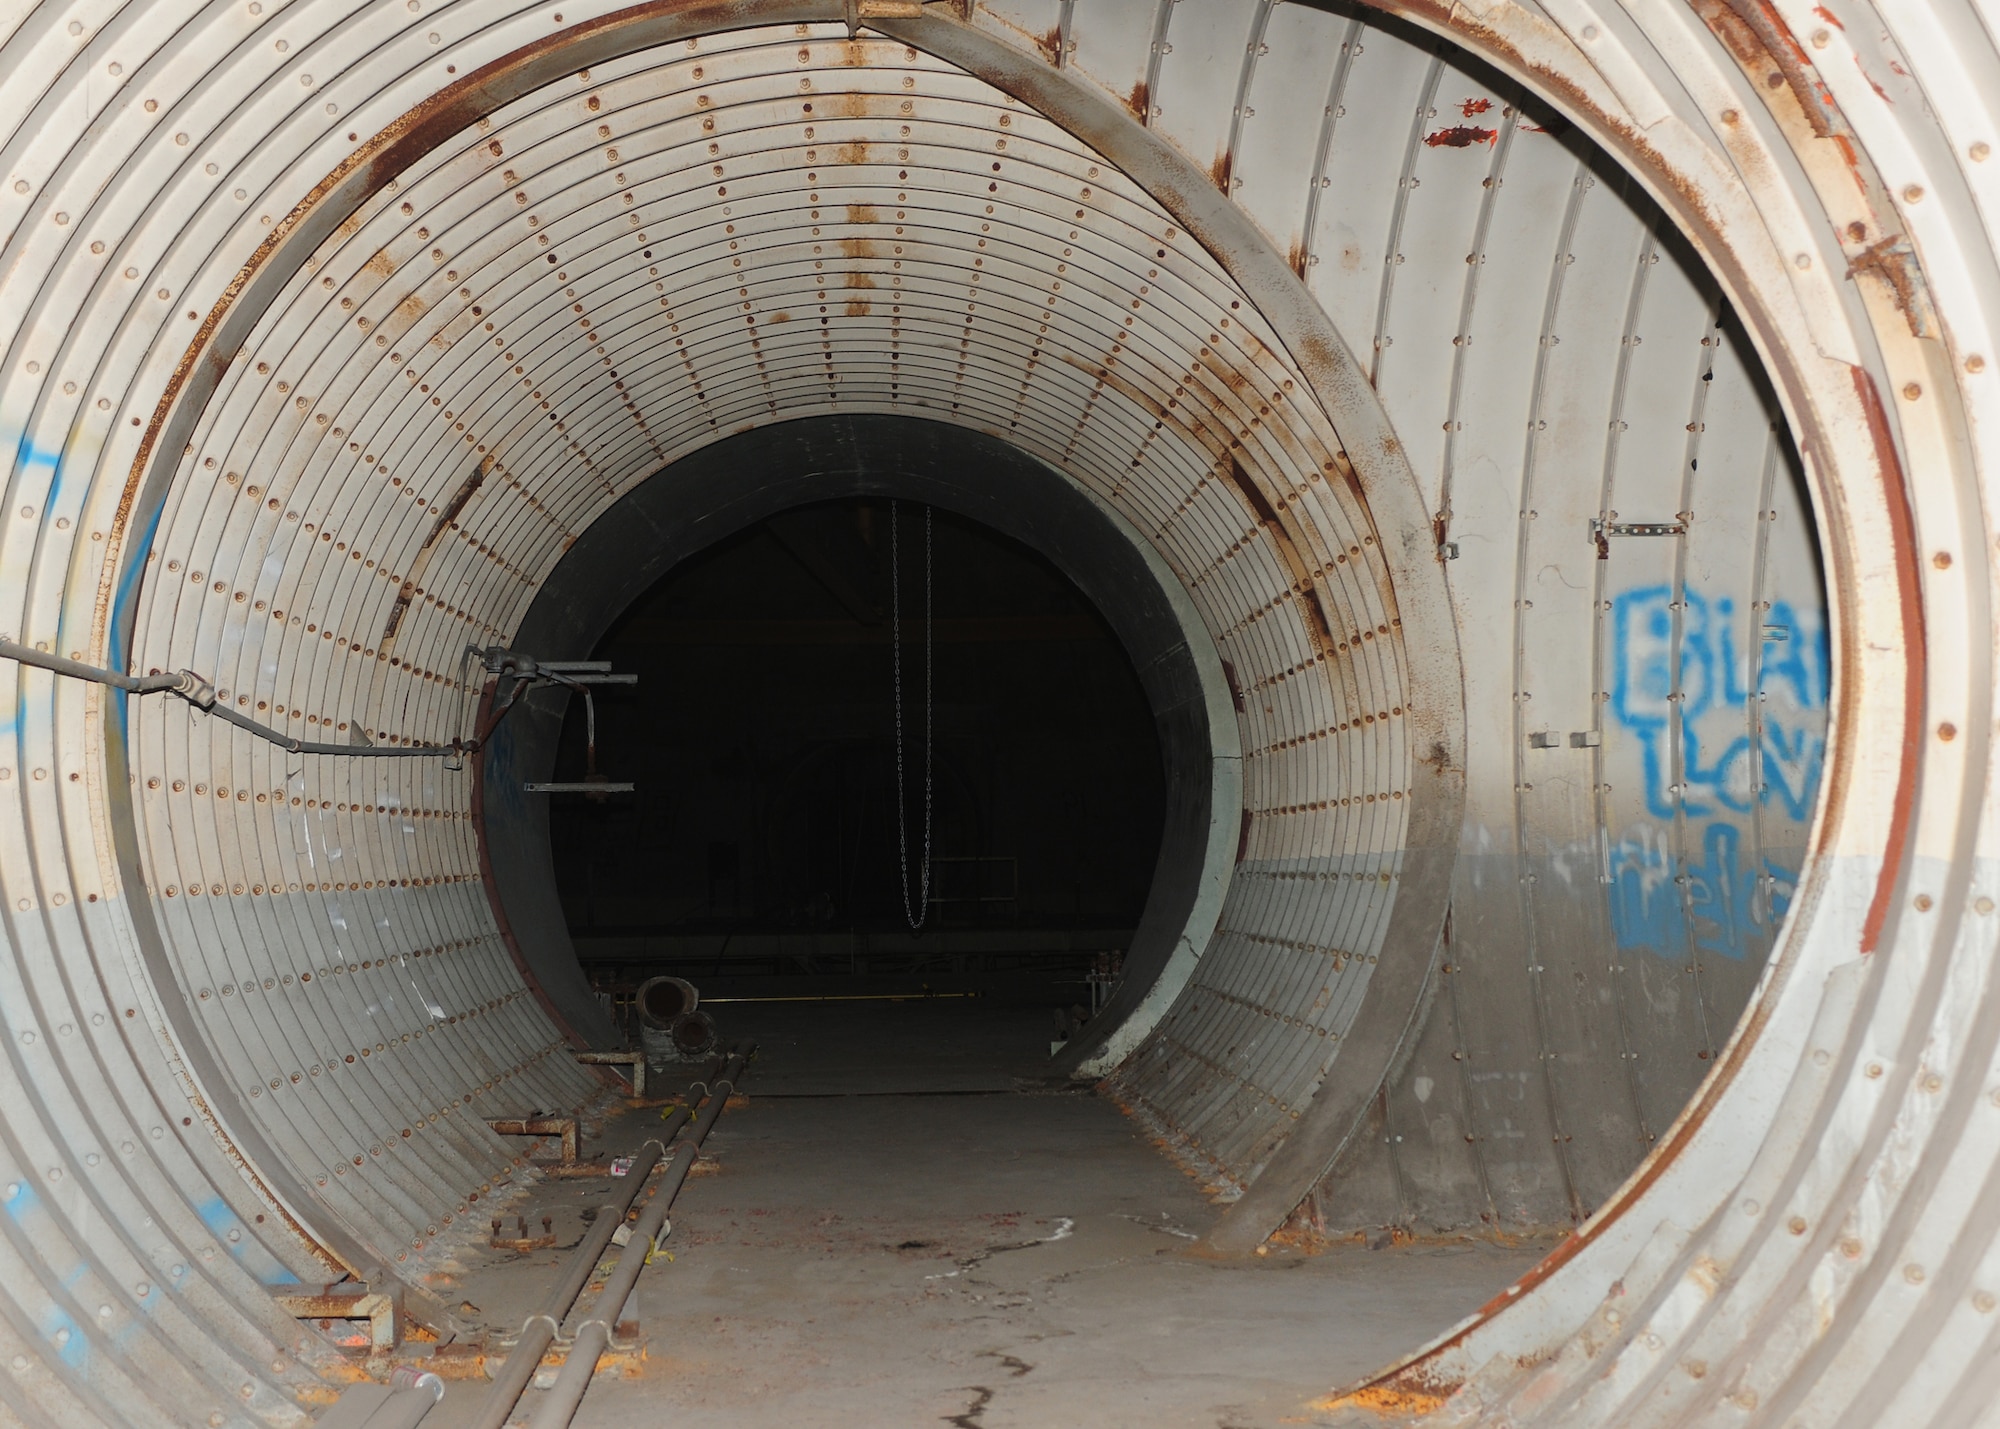 A photo of what used to be the 851st Strategic Missile Squadron, Titan 1 Intercontinental Ballistic Missile Complex 4C tunnels at Chico, Calif., May 23, 2013. Beale was once home to the 851st Strategic Missile Squadron and had three missile silo complexes, 851-A in Lincoln, 851-B in Sutter Buttes and 851-C in Chico, from Feb. 1, 1961-March 25, 1965. (U.S. Air Force photo by Senior Airman Allen Pollard/Released)